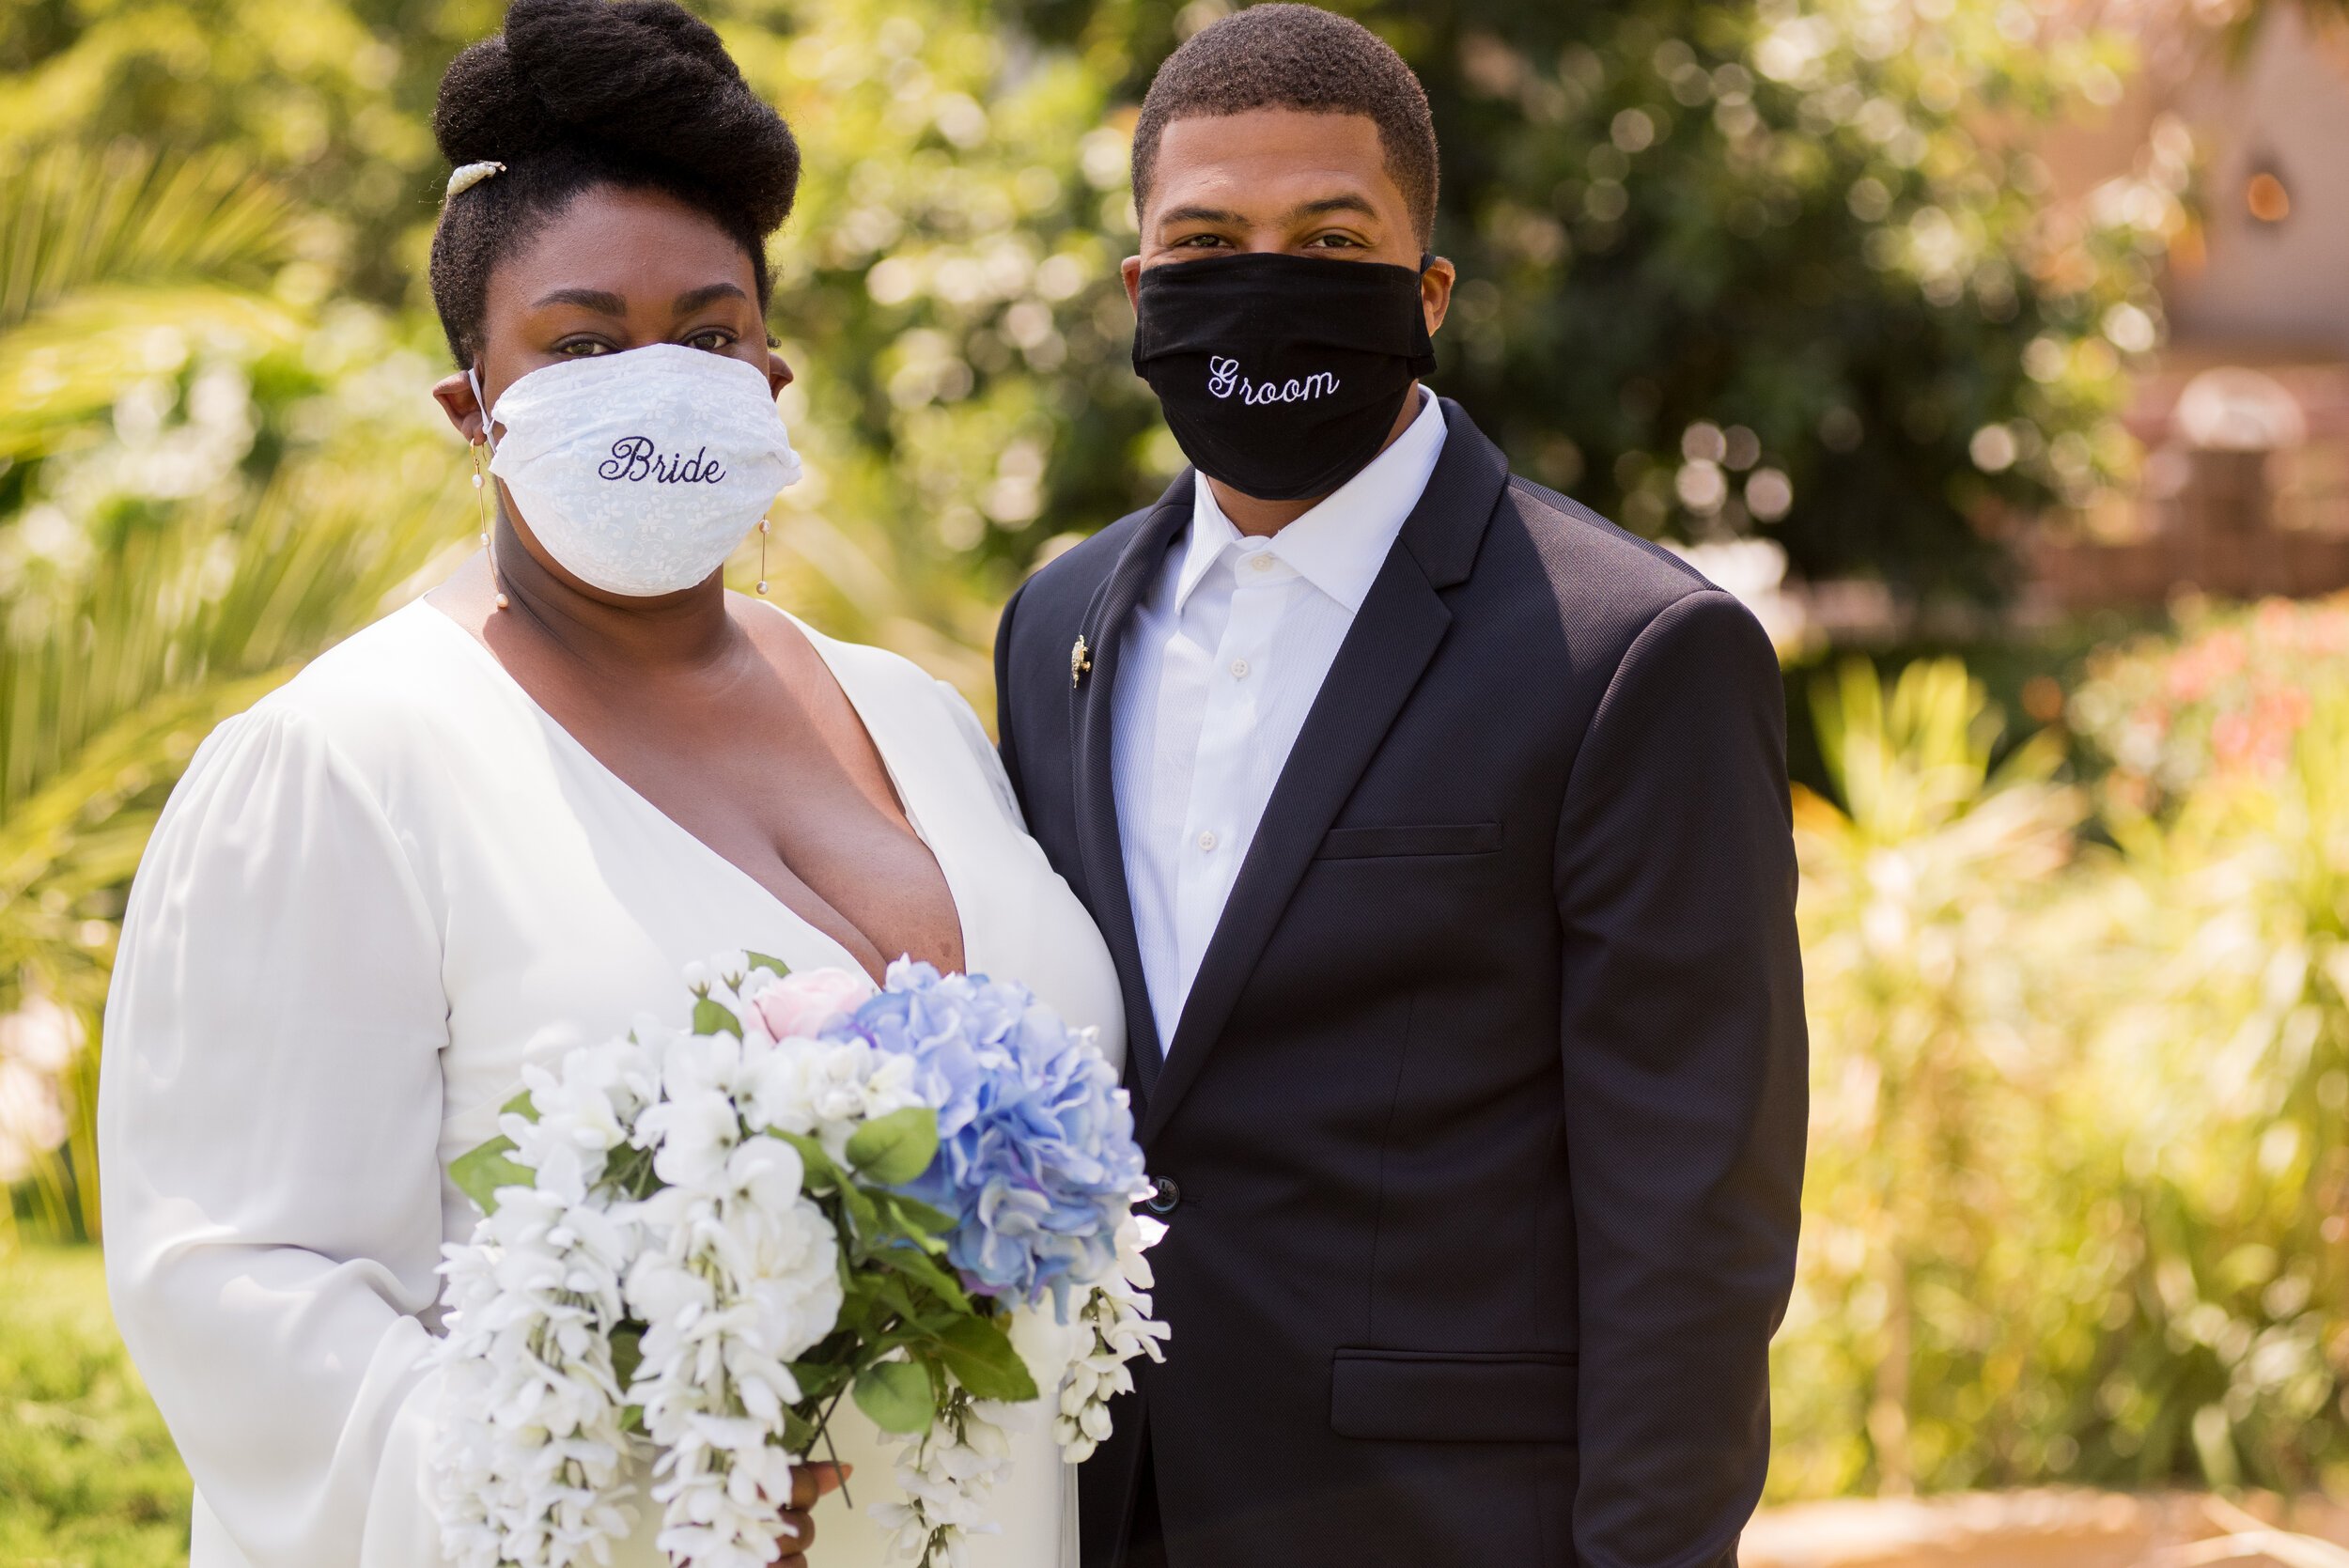 www.santabarbarawedding.com | ByCherry Photography | Santa Barbara Courthouse | Bride and Groom Outside the Courthouse with Their Masks On